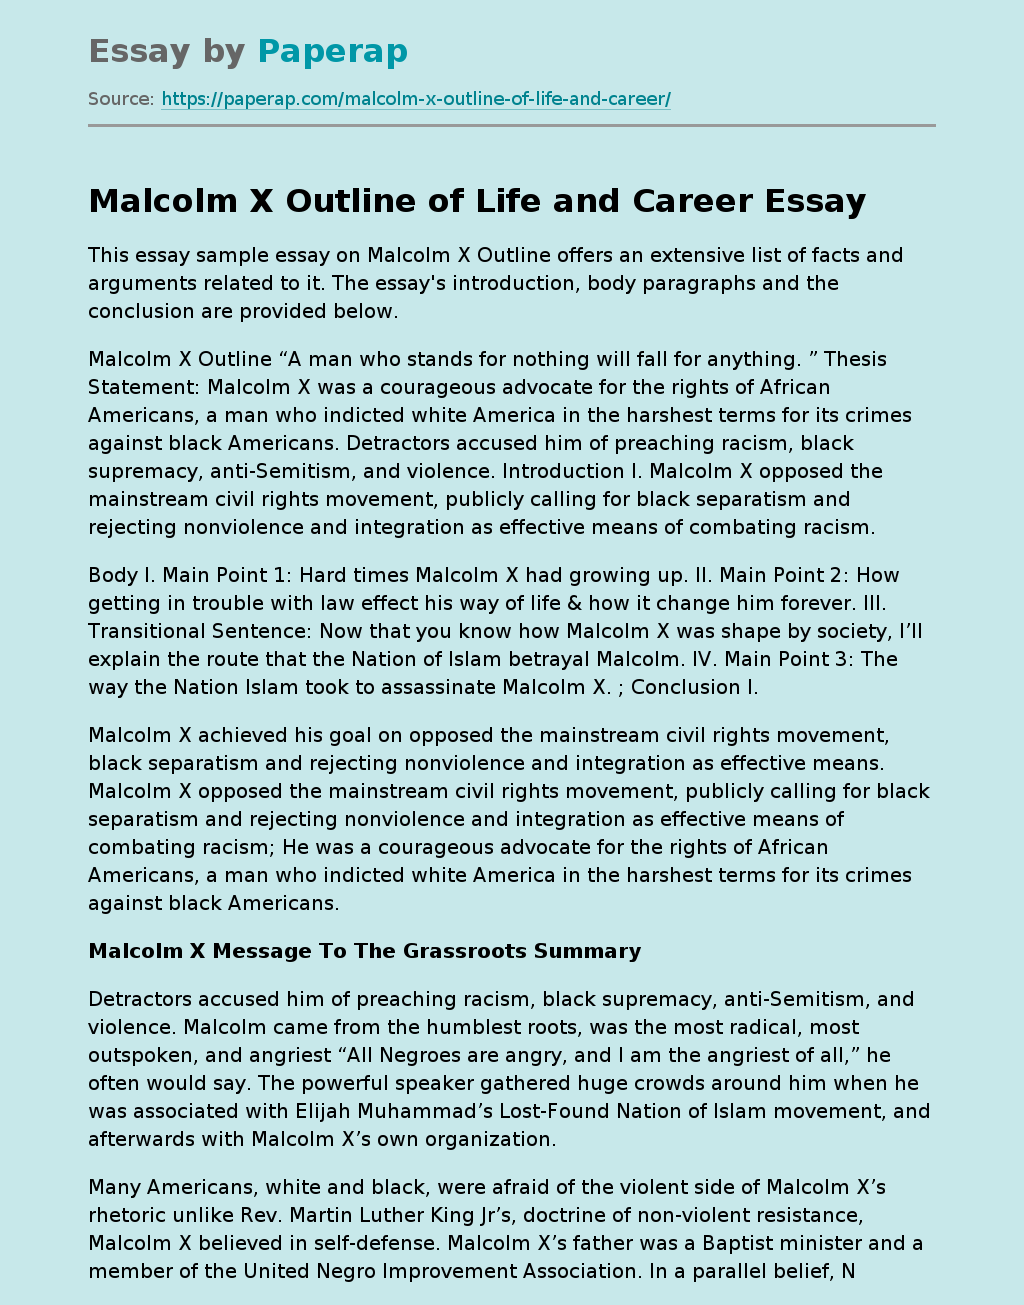 Malcolm X Outline of Life and Career